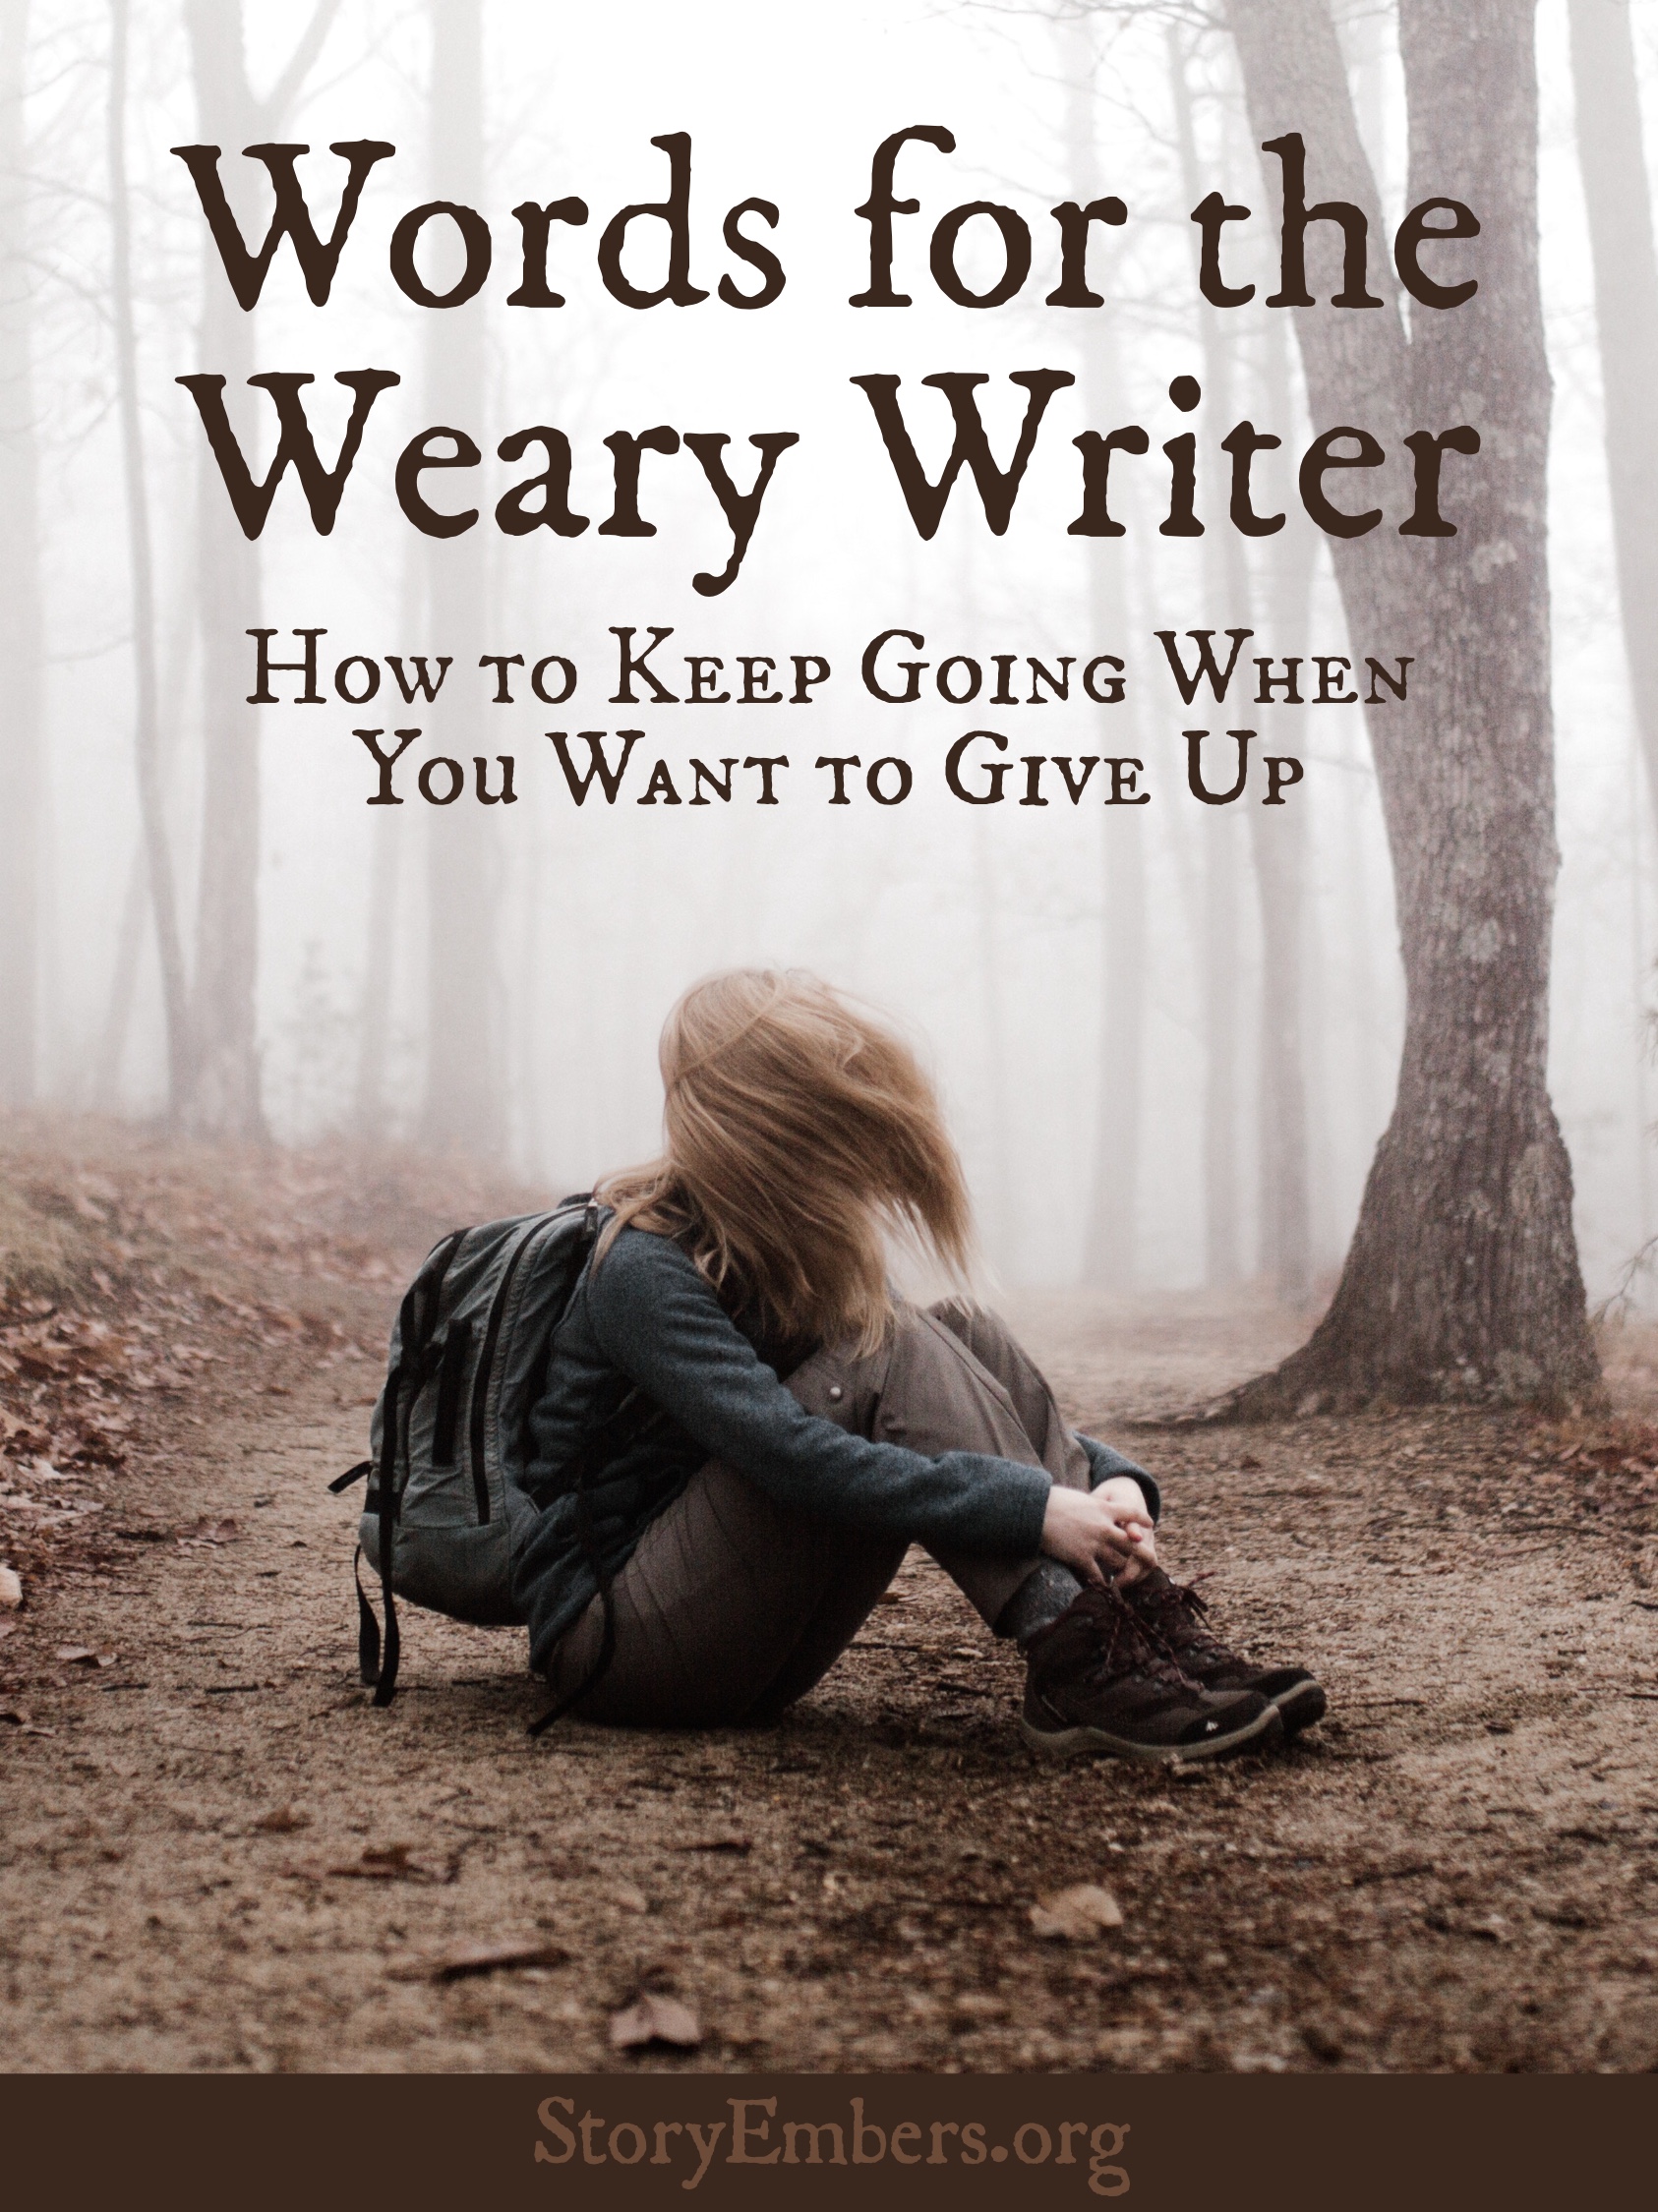 Words for the Weary Writer E-book